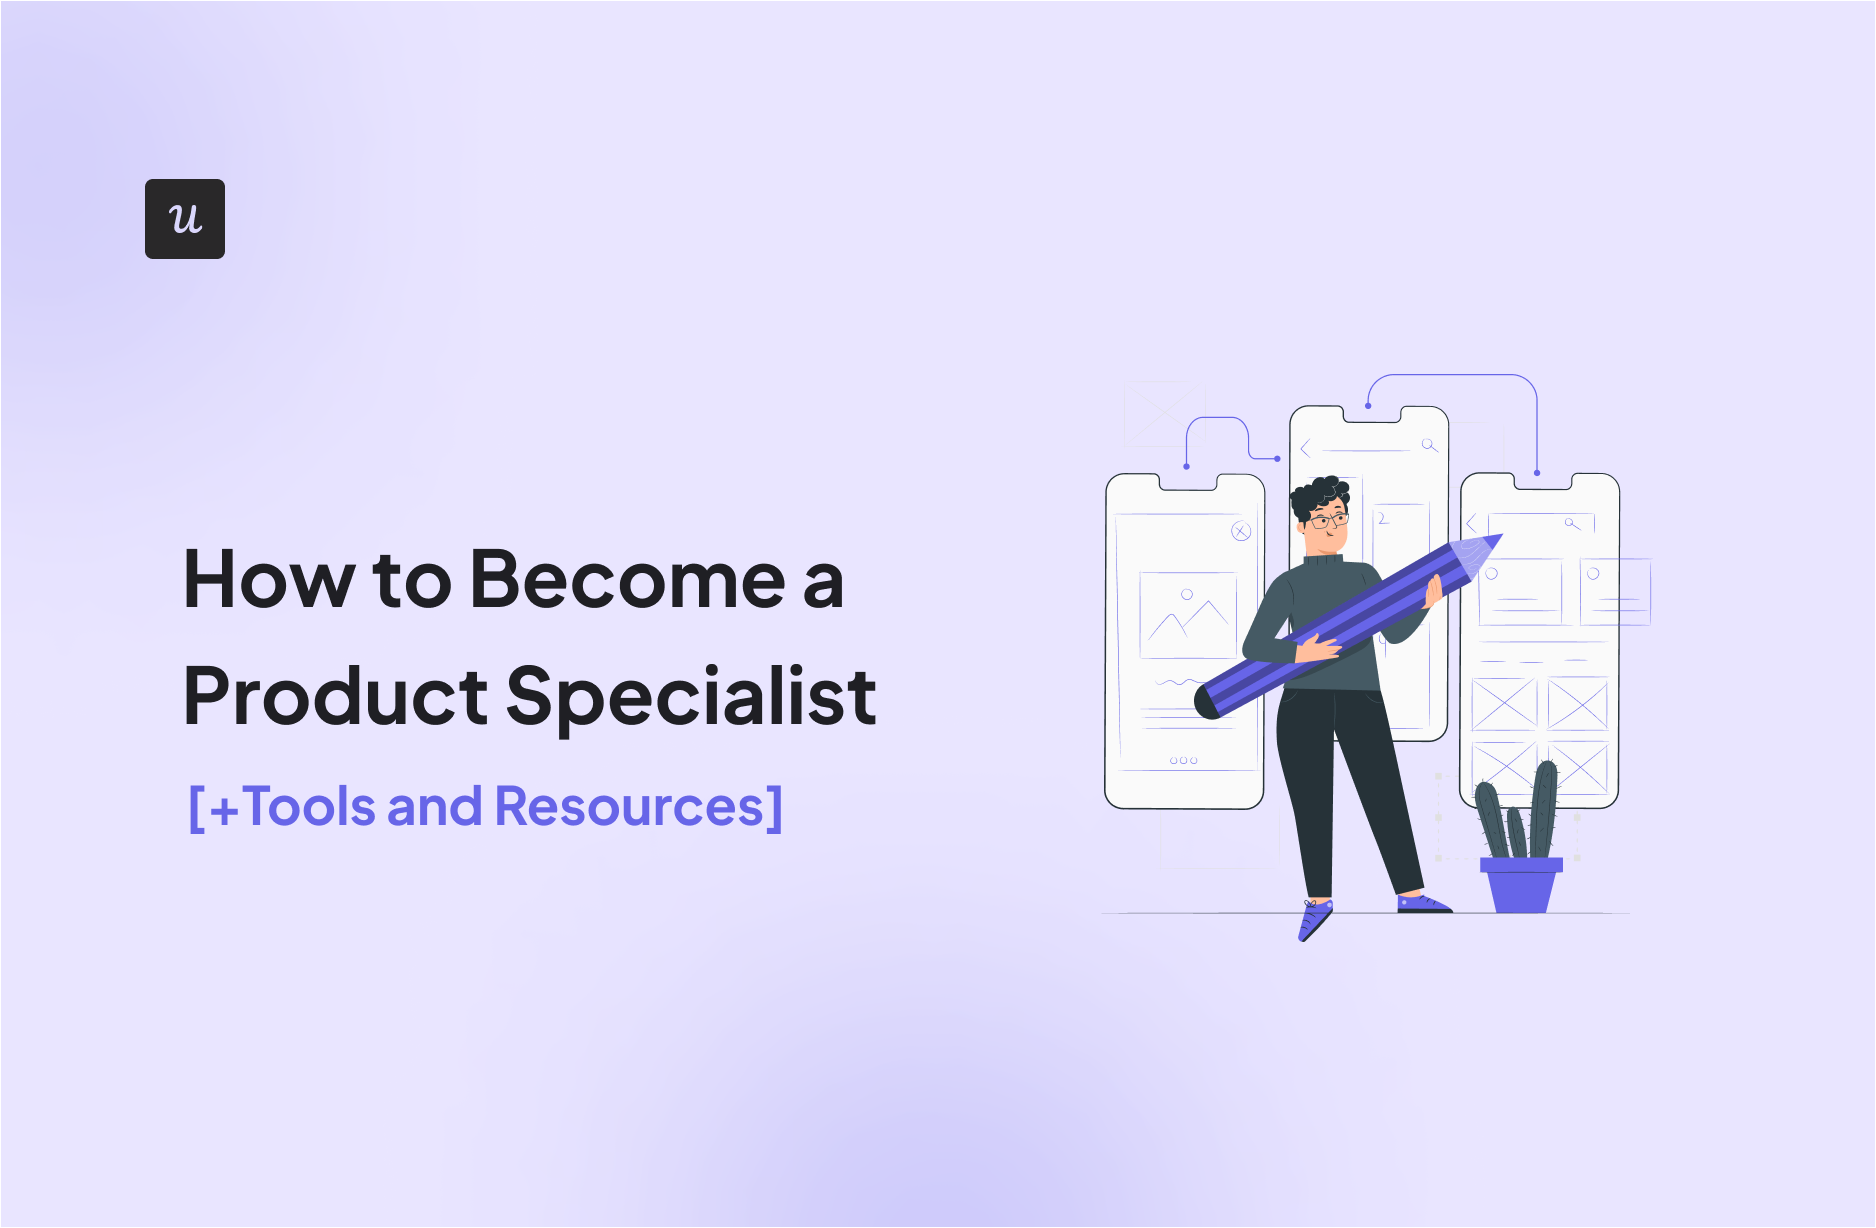 How to Become a Product Specialist [+Tools and Resources]